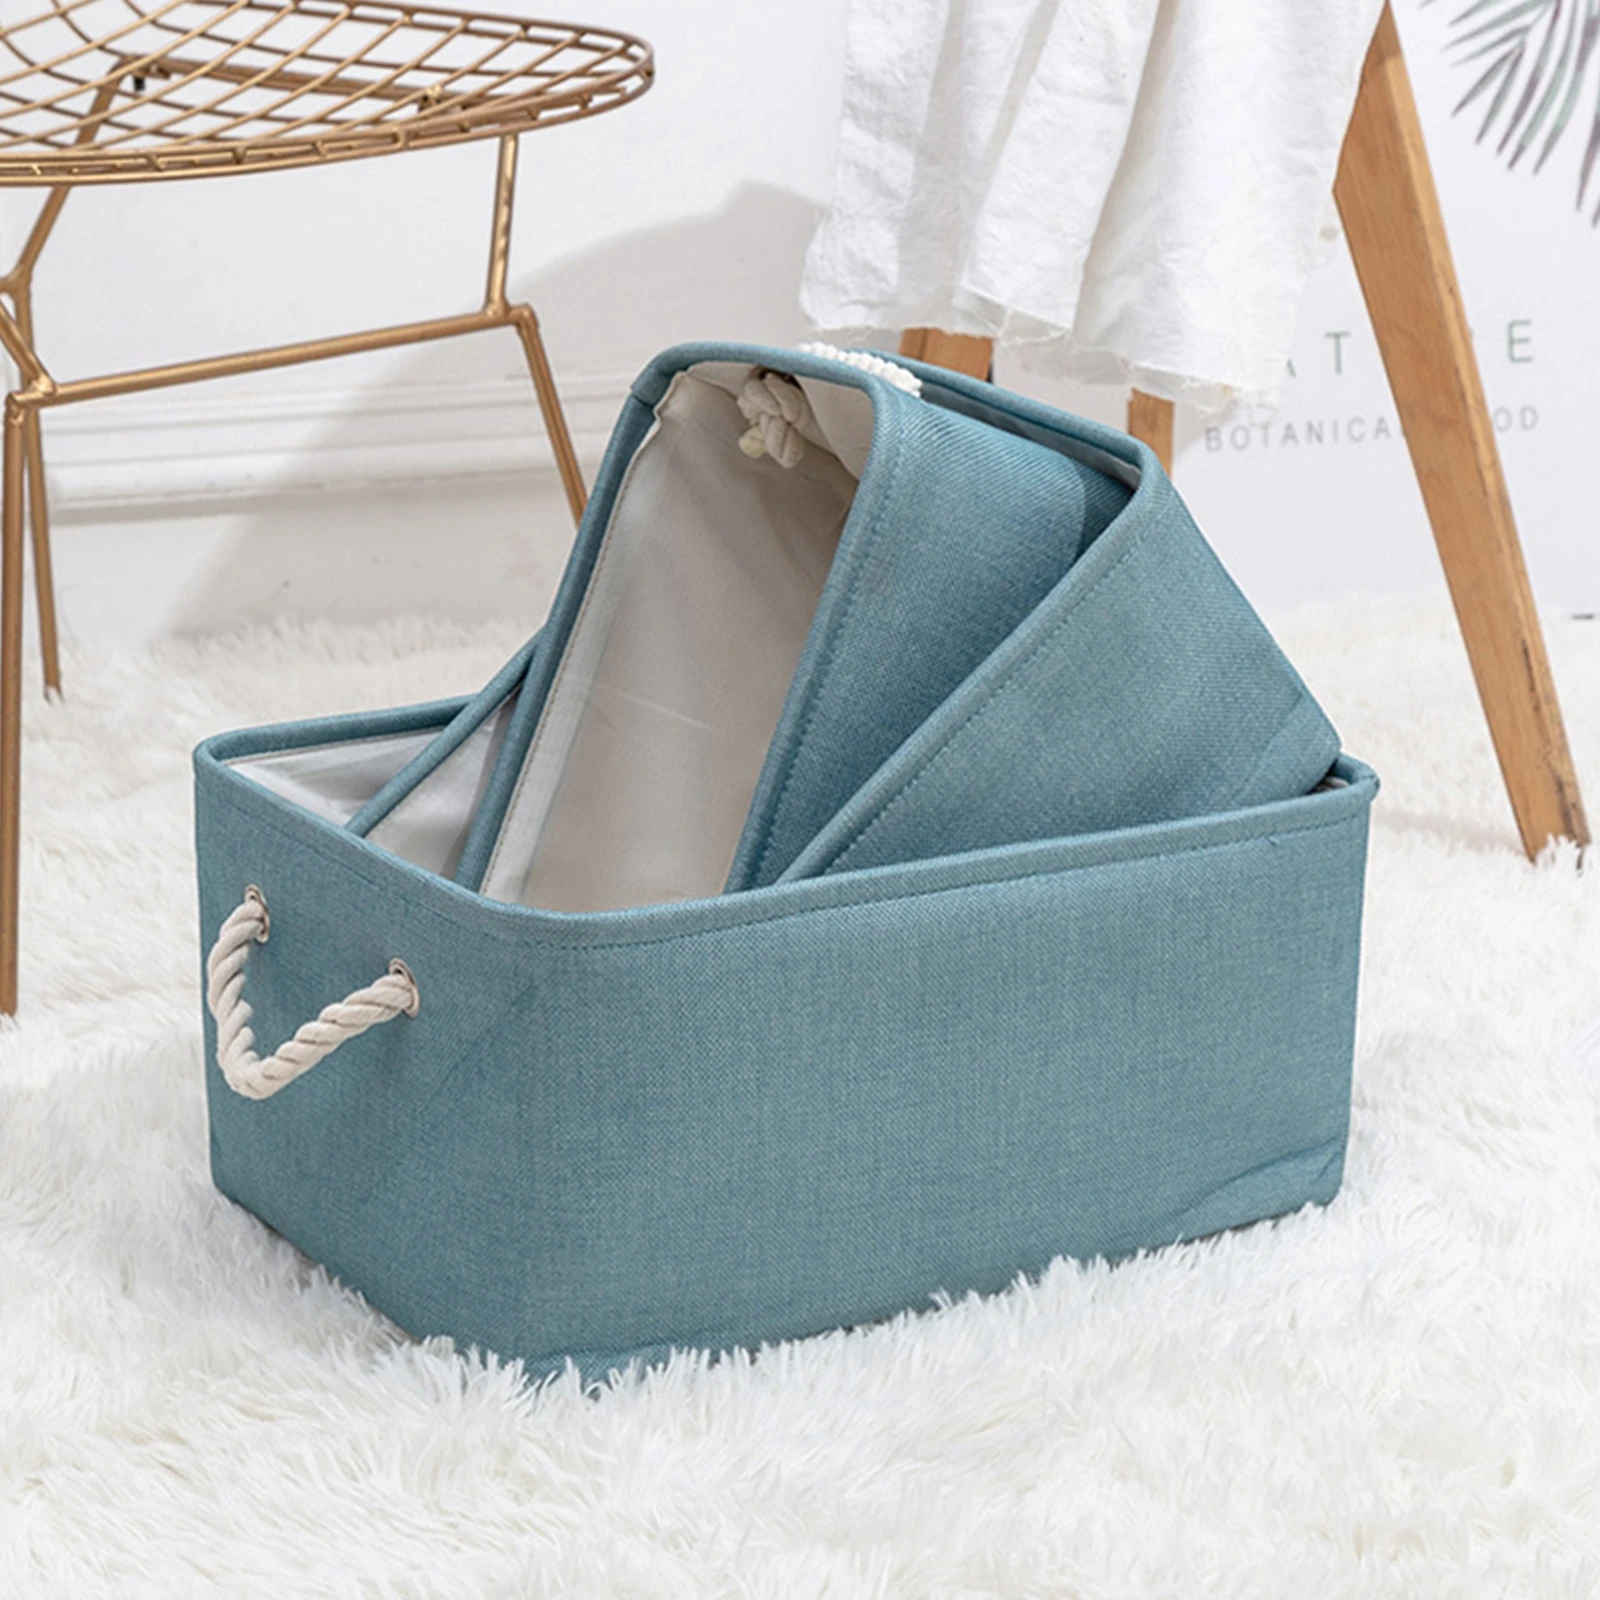 Collapsible Fabric Storage Basket Baby Toy Organizer Linen Cloth with Handle for Home